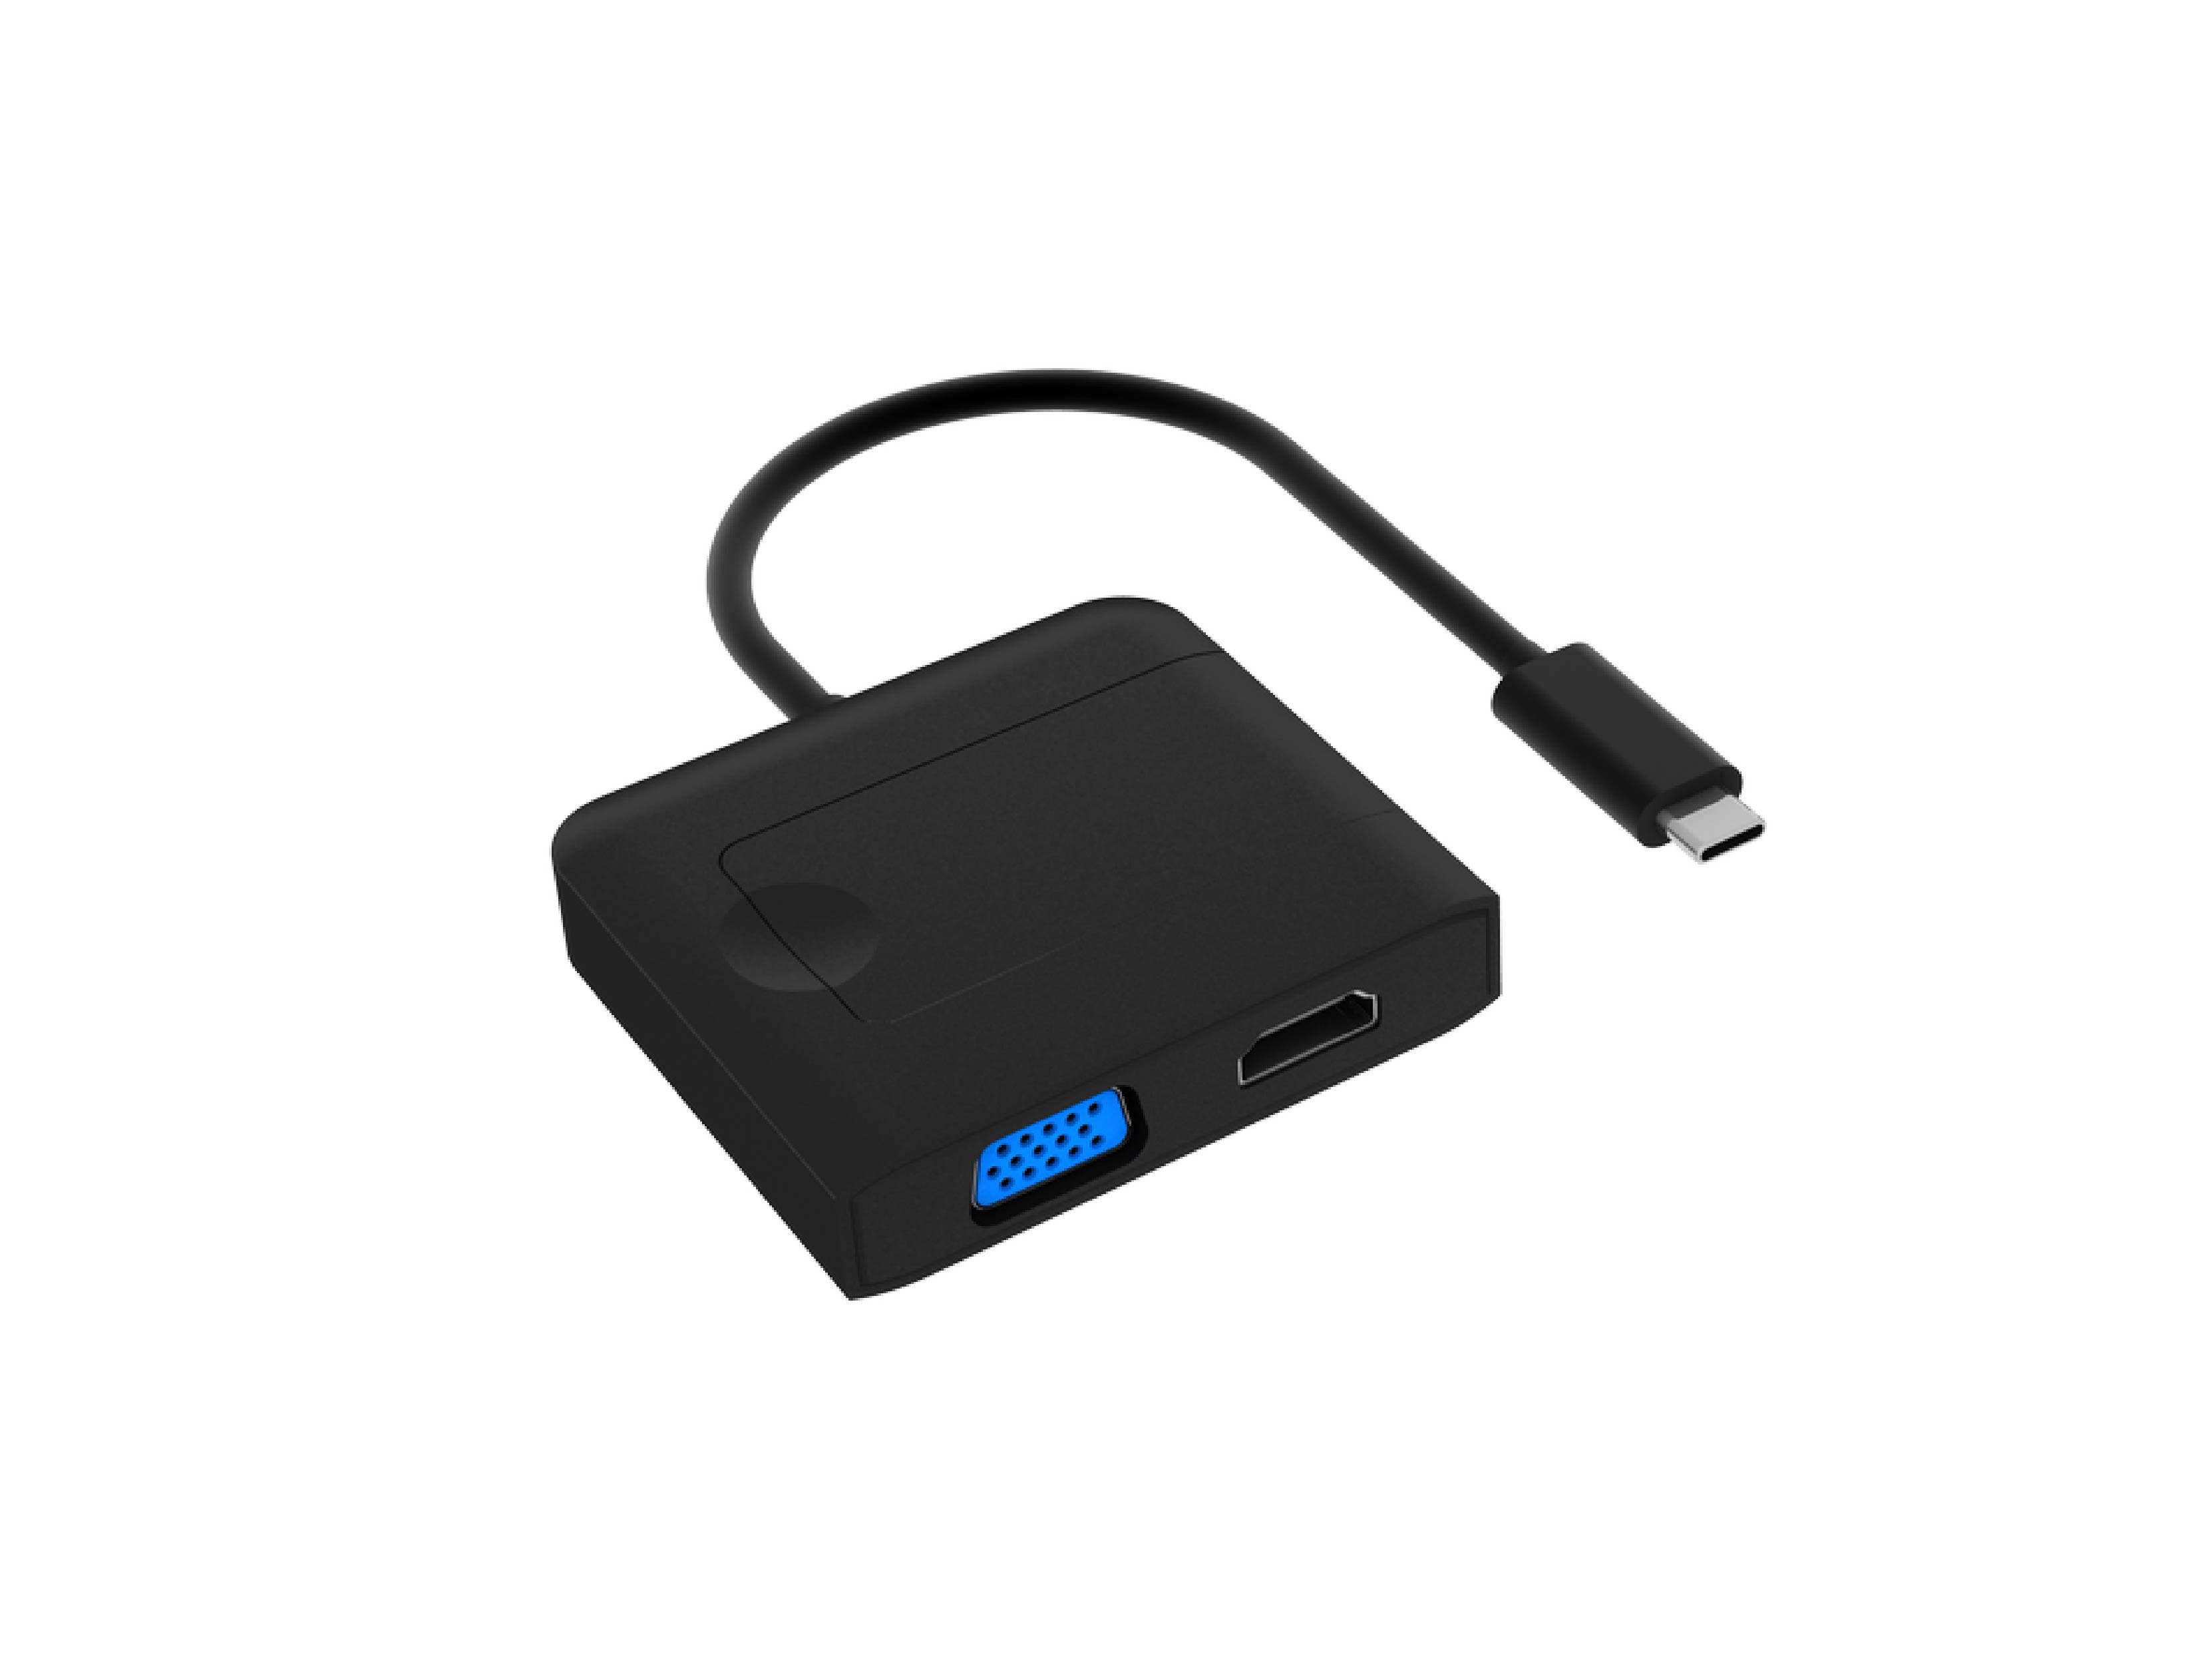 M.2 NVMe SSD Travel Dongle (SI-1119U31PV), USB3.2 to VGA 1080P@60Hz/HDMI 4K@30Hz adapter with M.2 SSD Slot, Supports SSD to sizes 2230/2242.